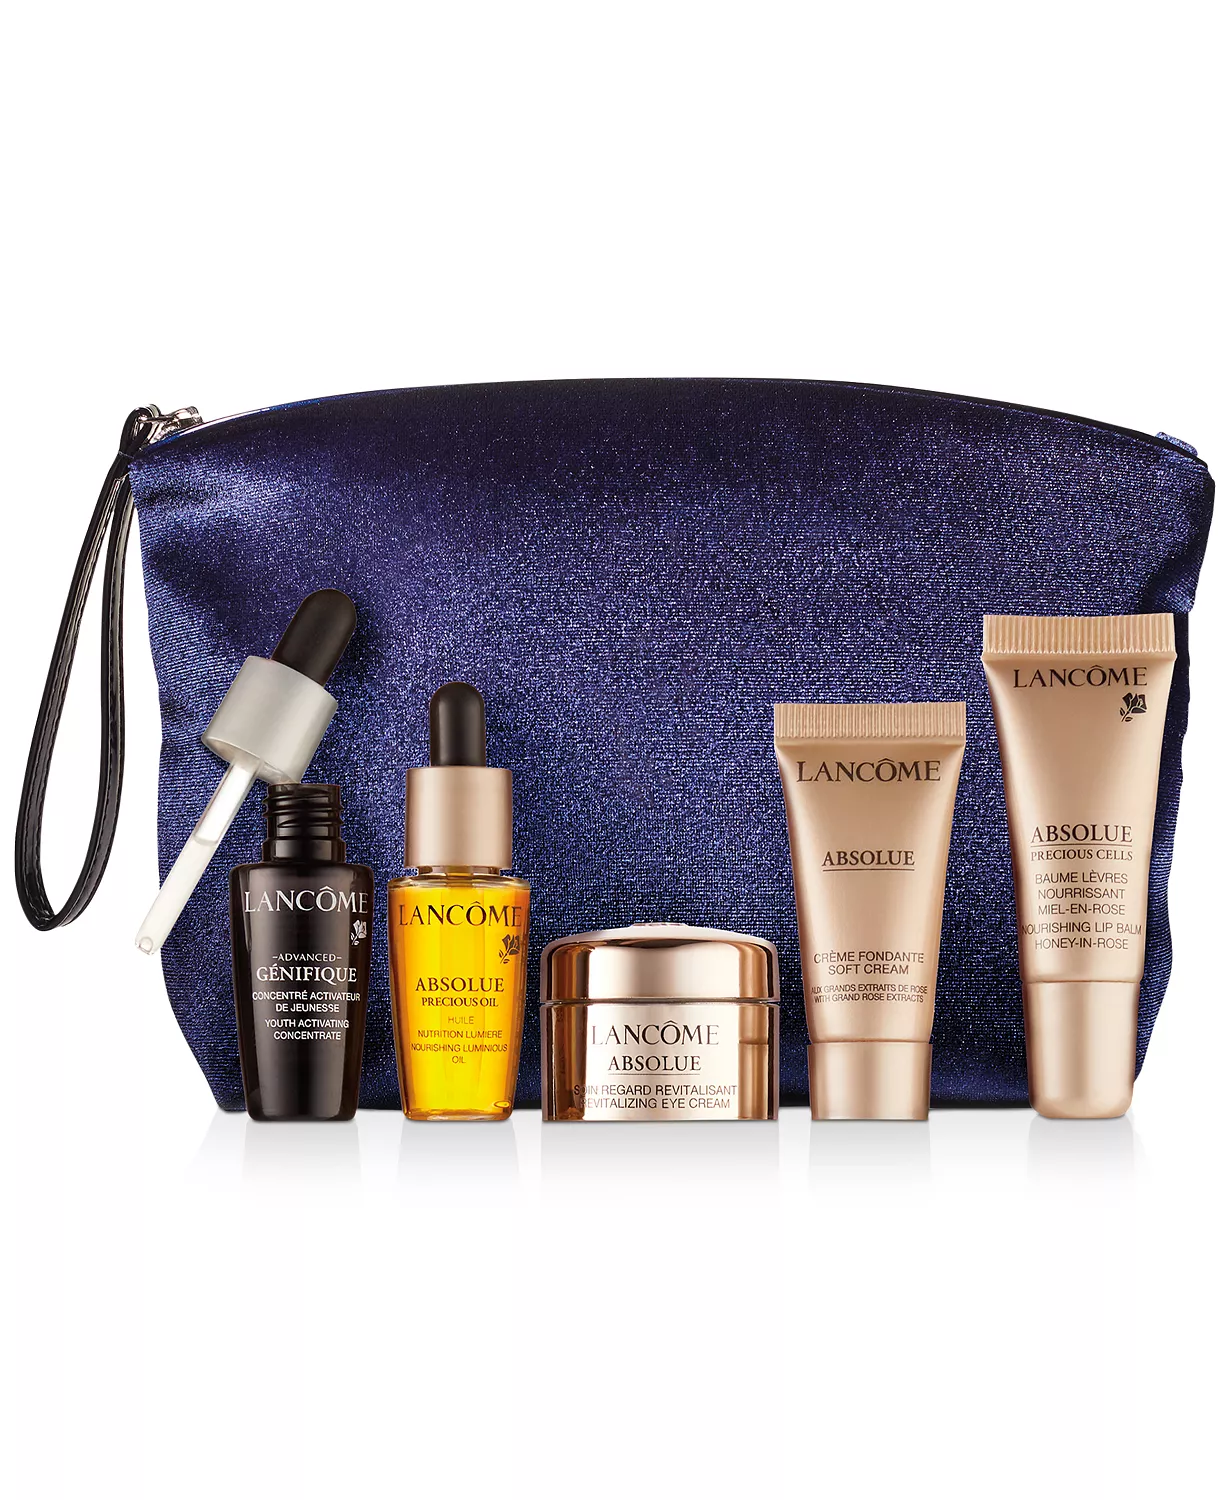 Lancôme: Choose your FREE GIFT with any $42.50 Lancôme purchase and exclusive makeup bag. Gift value up to $121*